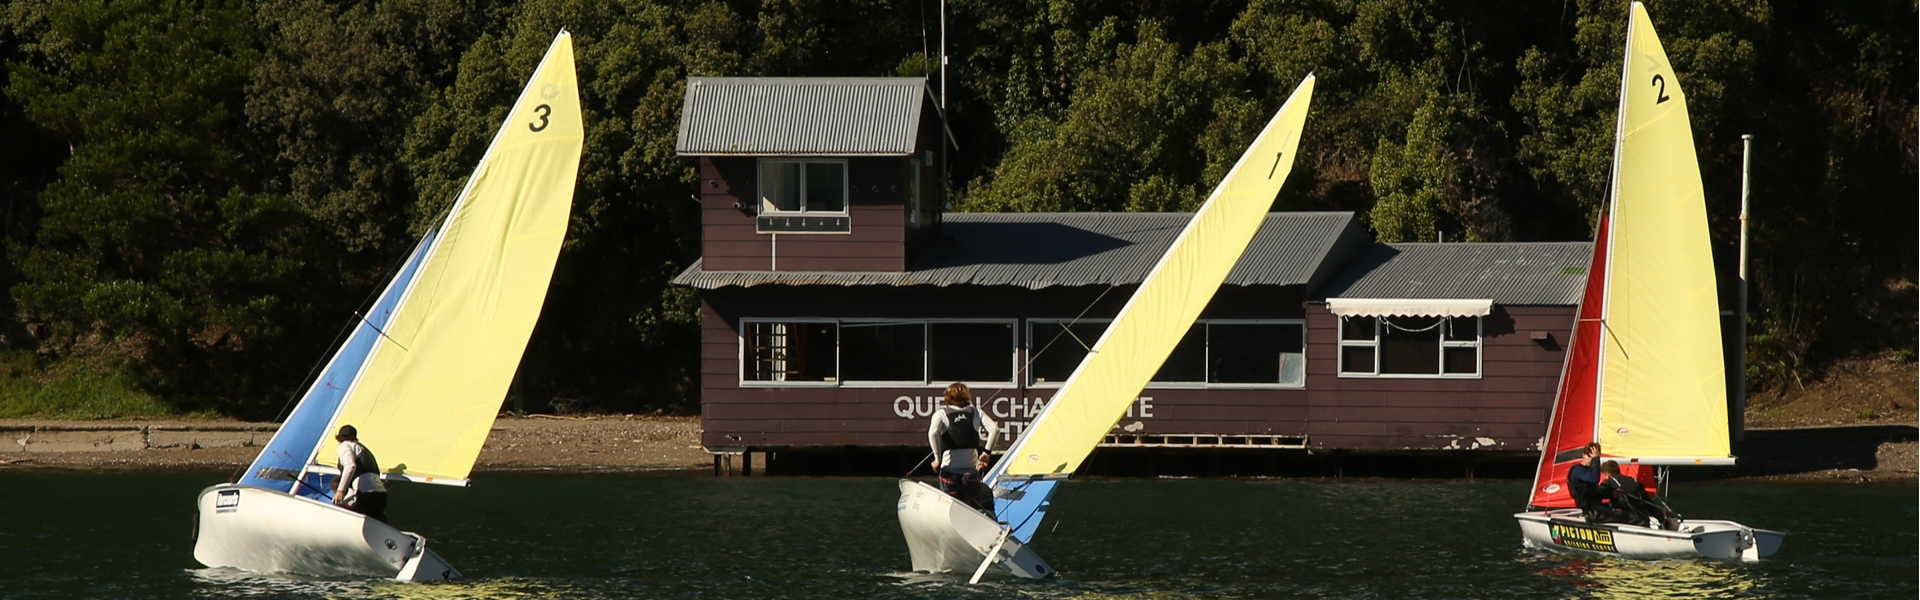 Sailing Boat Activities At Parklands Marina Holiday Park In Picton NZ